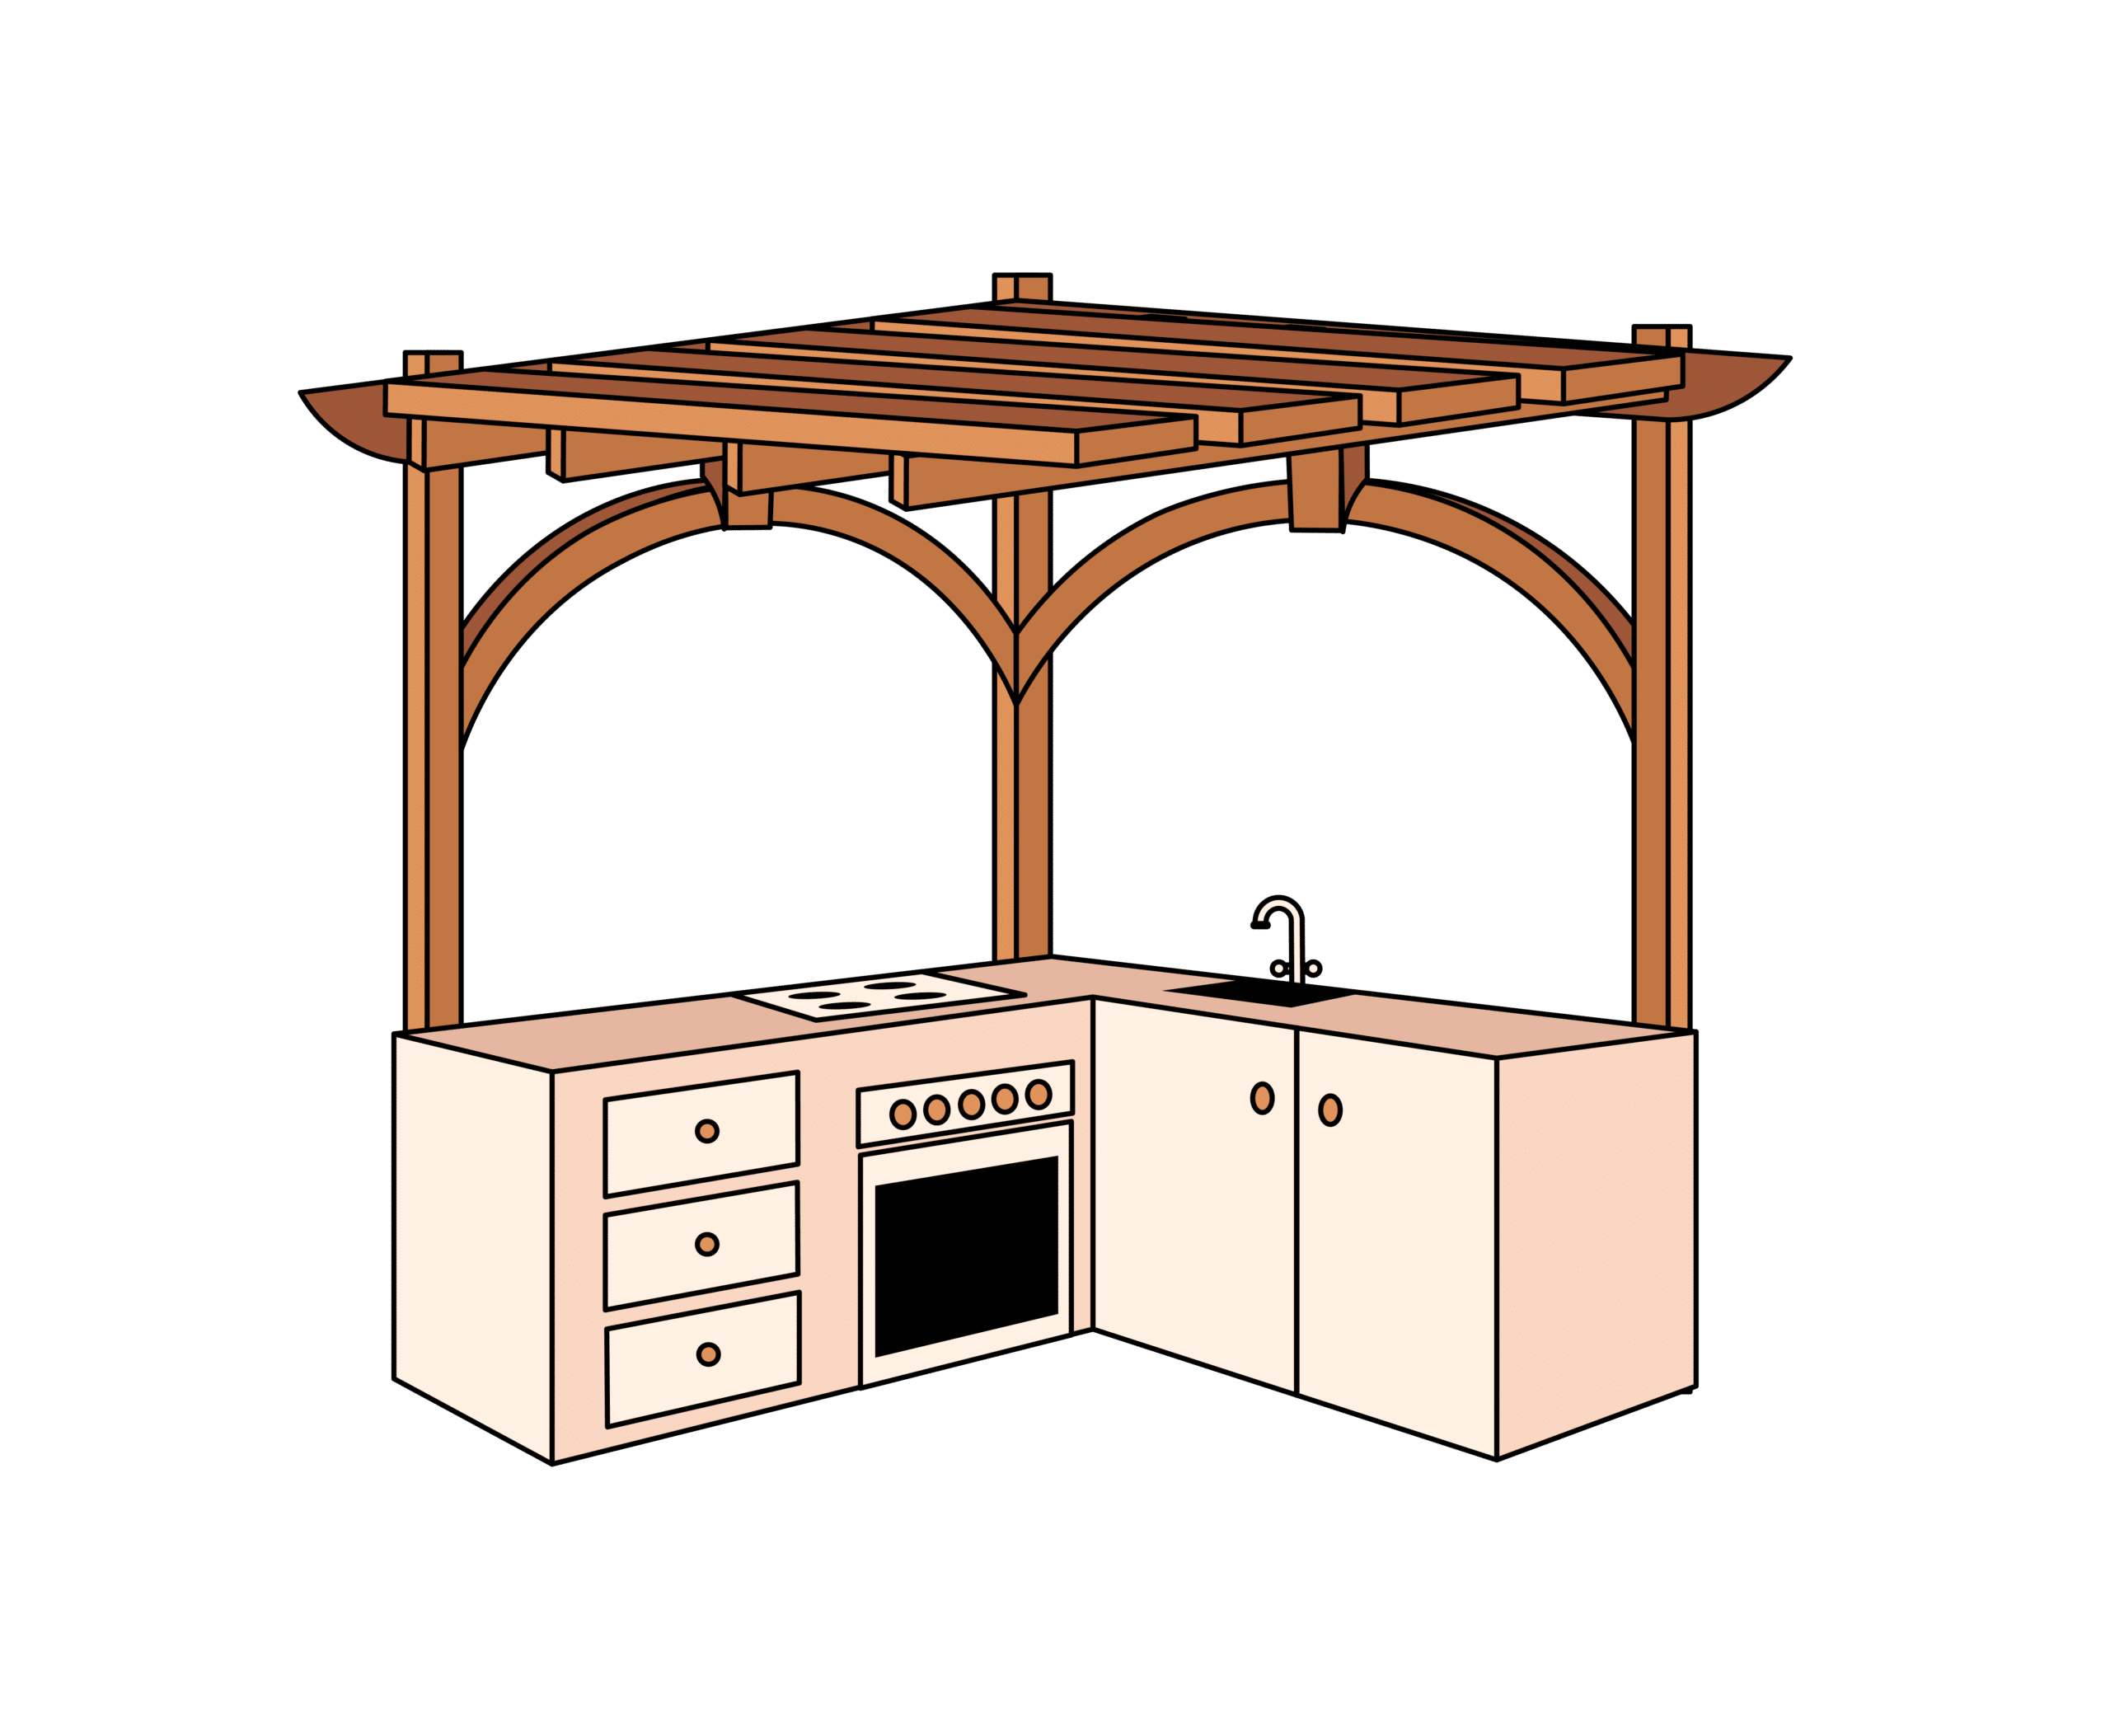 Pergola roof for outdoor kitchen